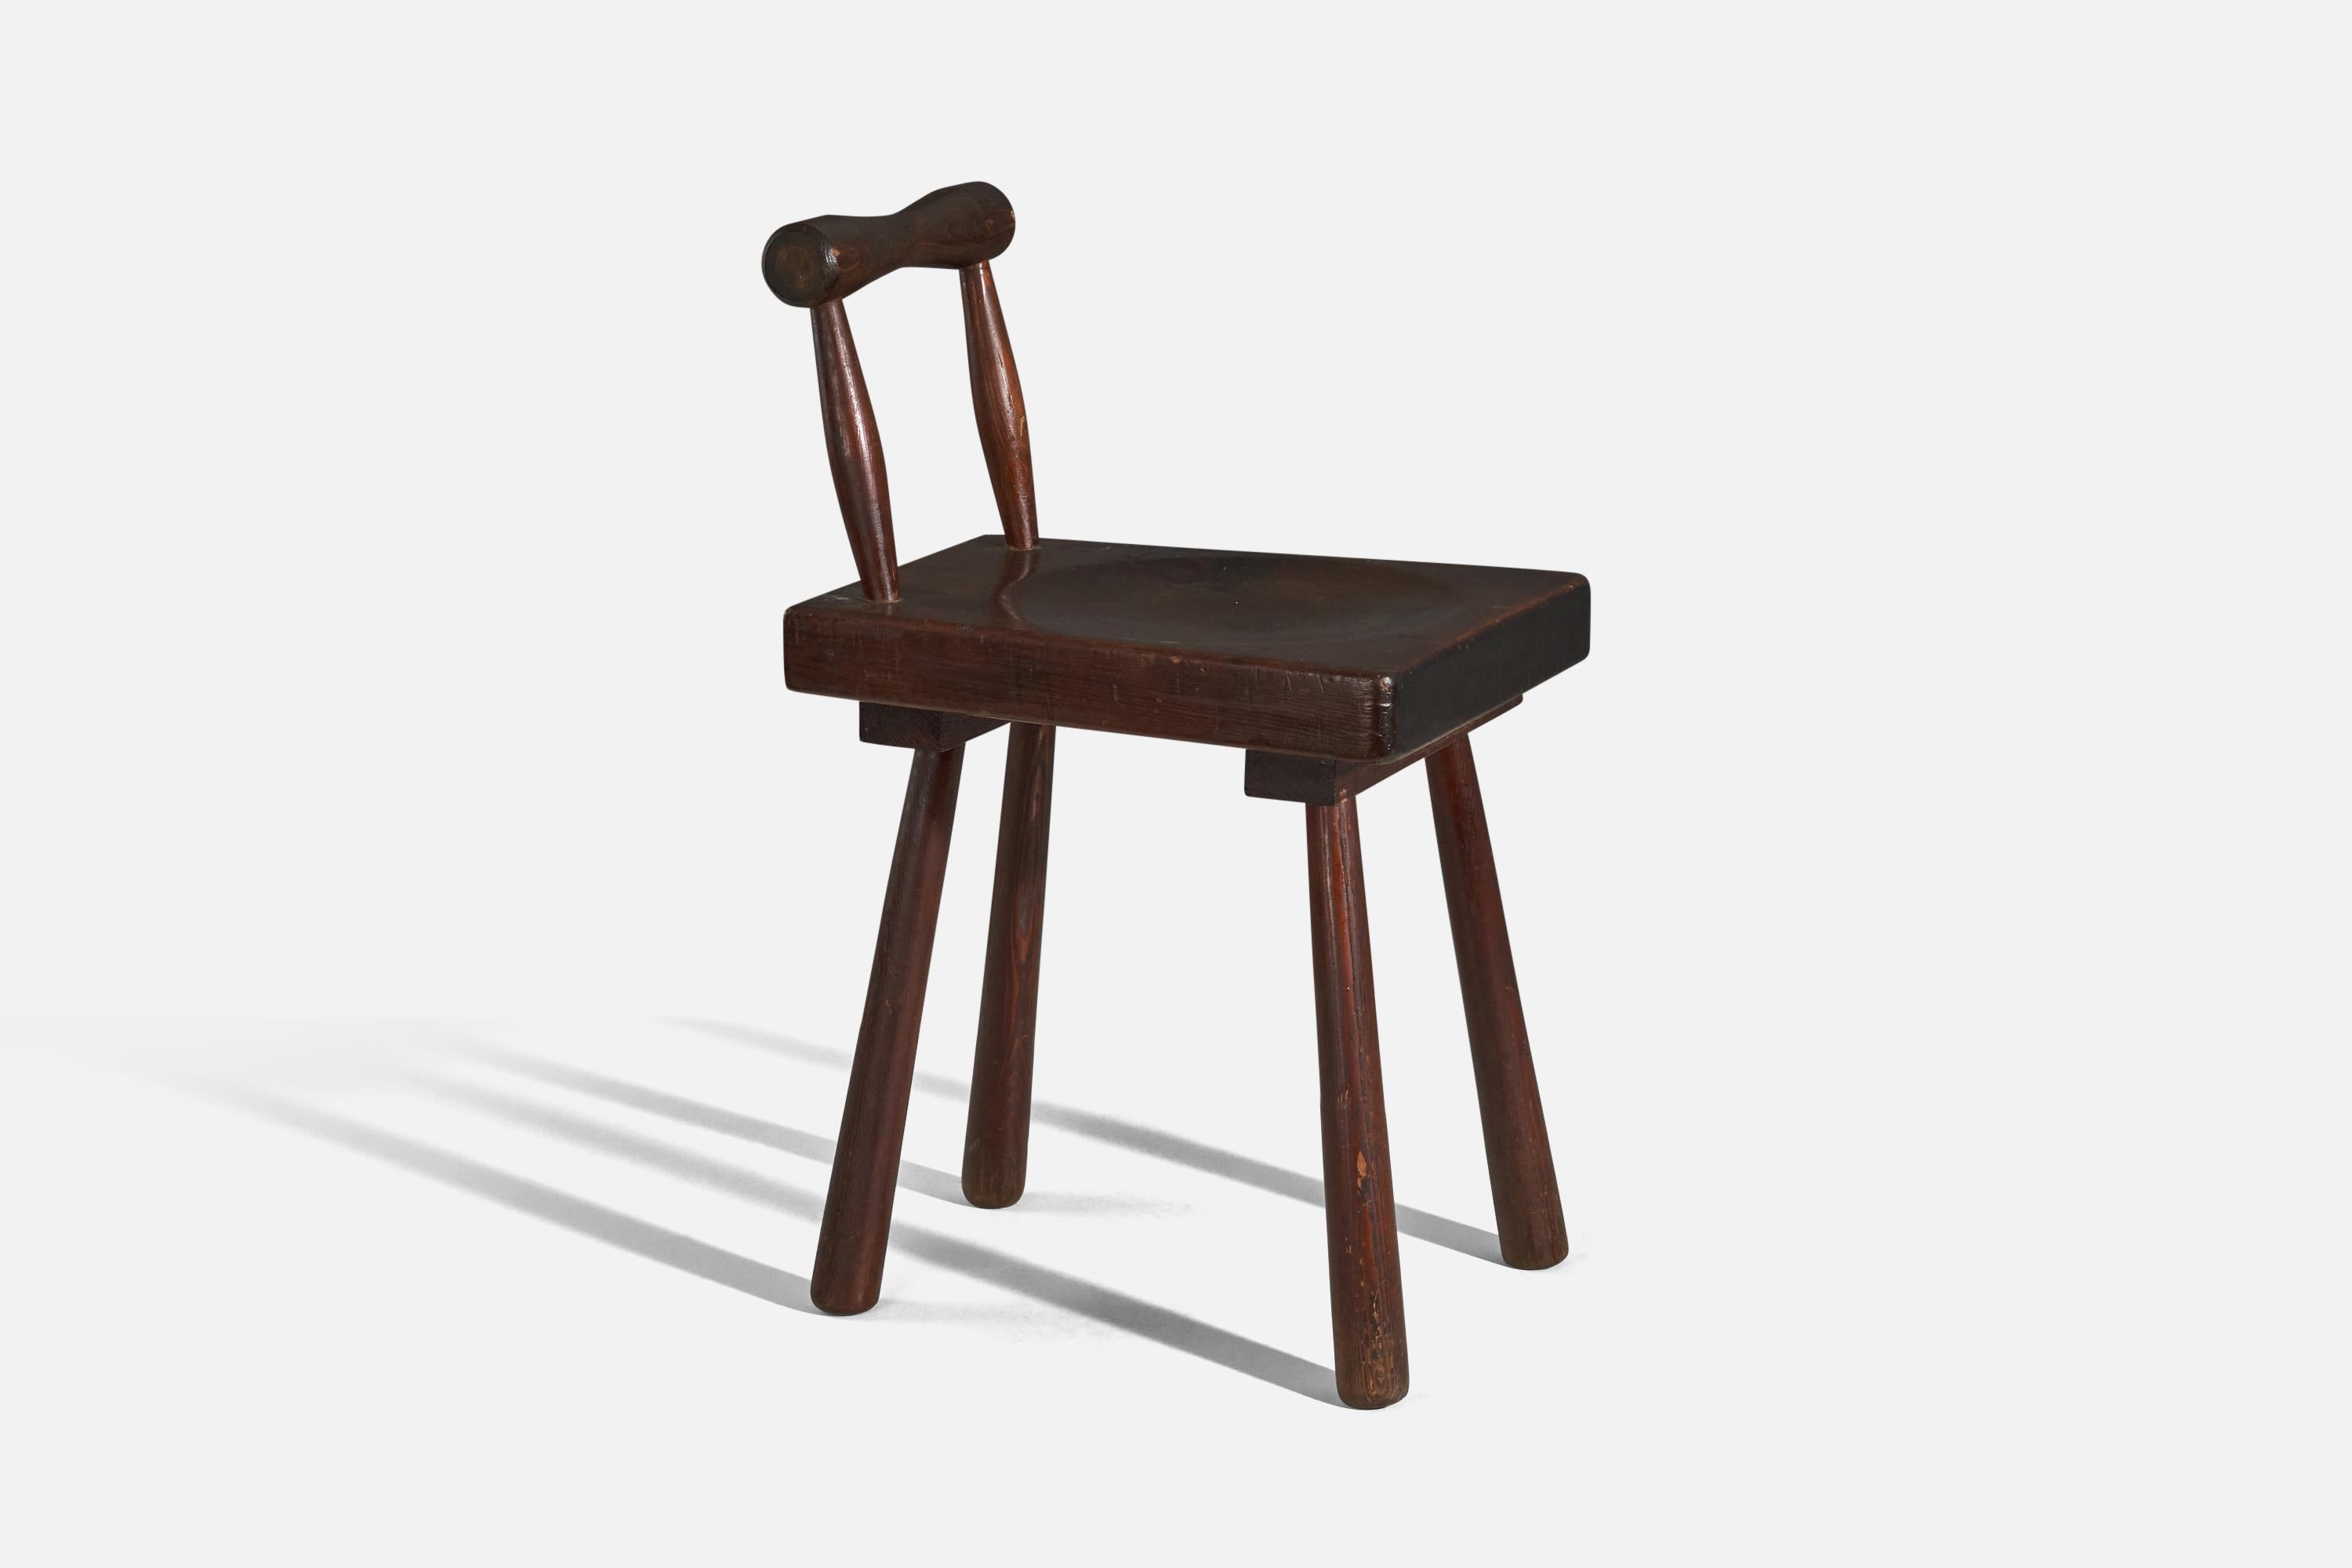 A wooden stool or side chair designed and produced in France, 1950s.

